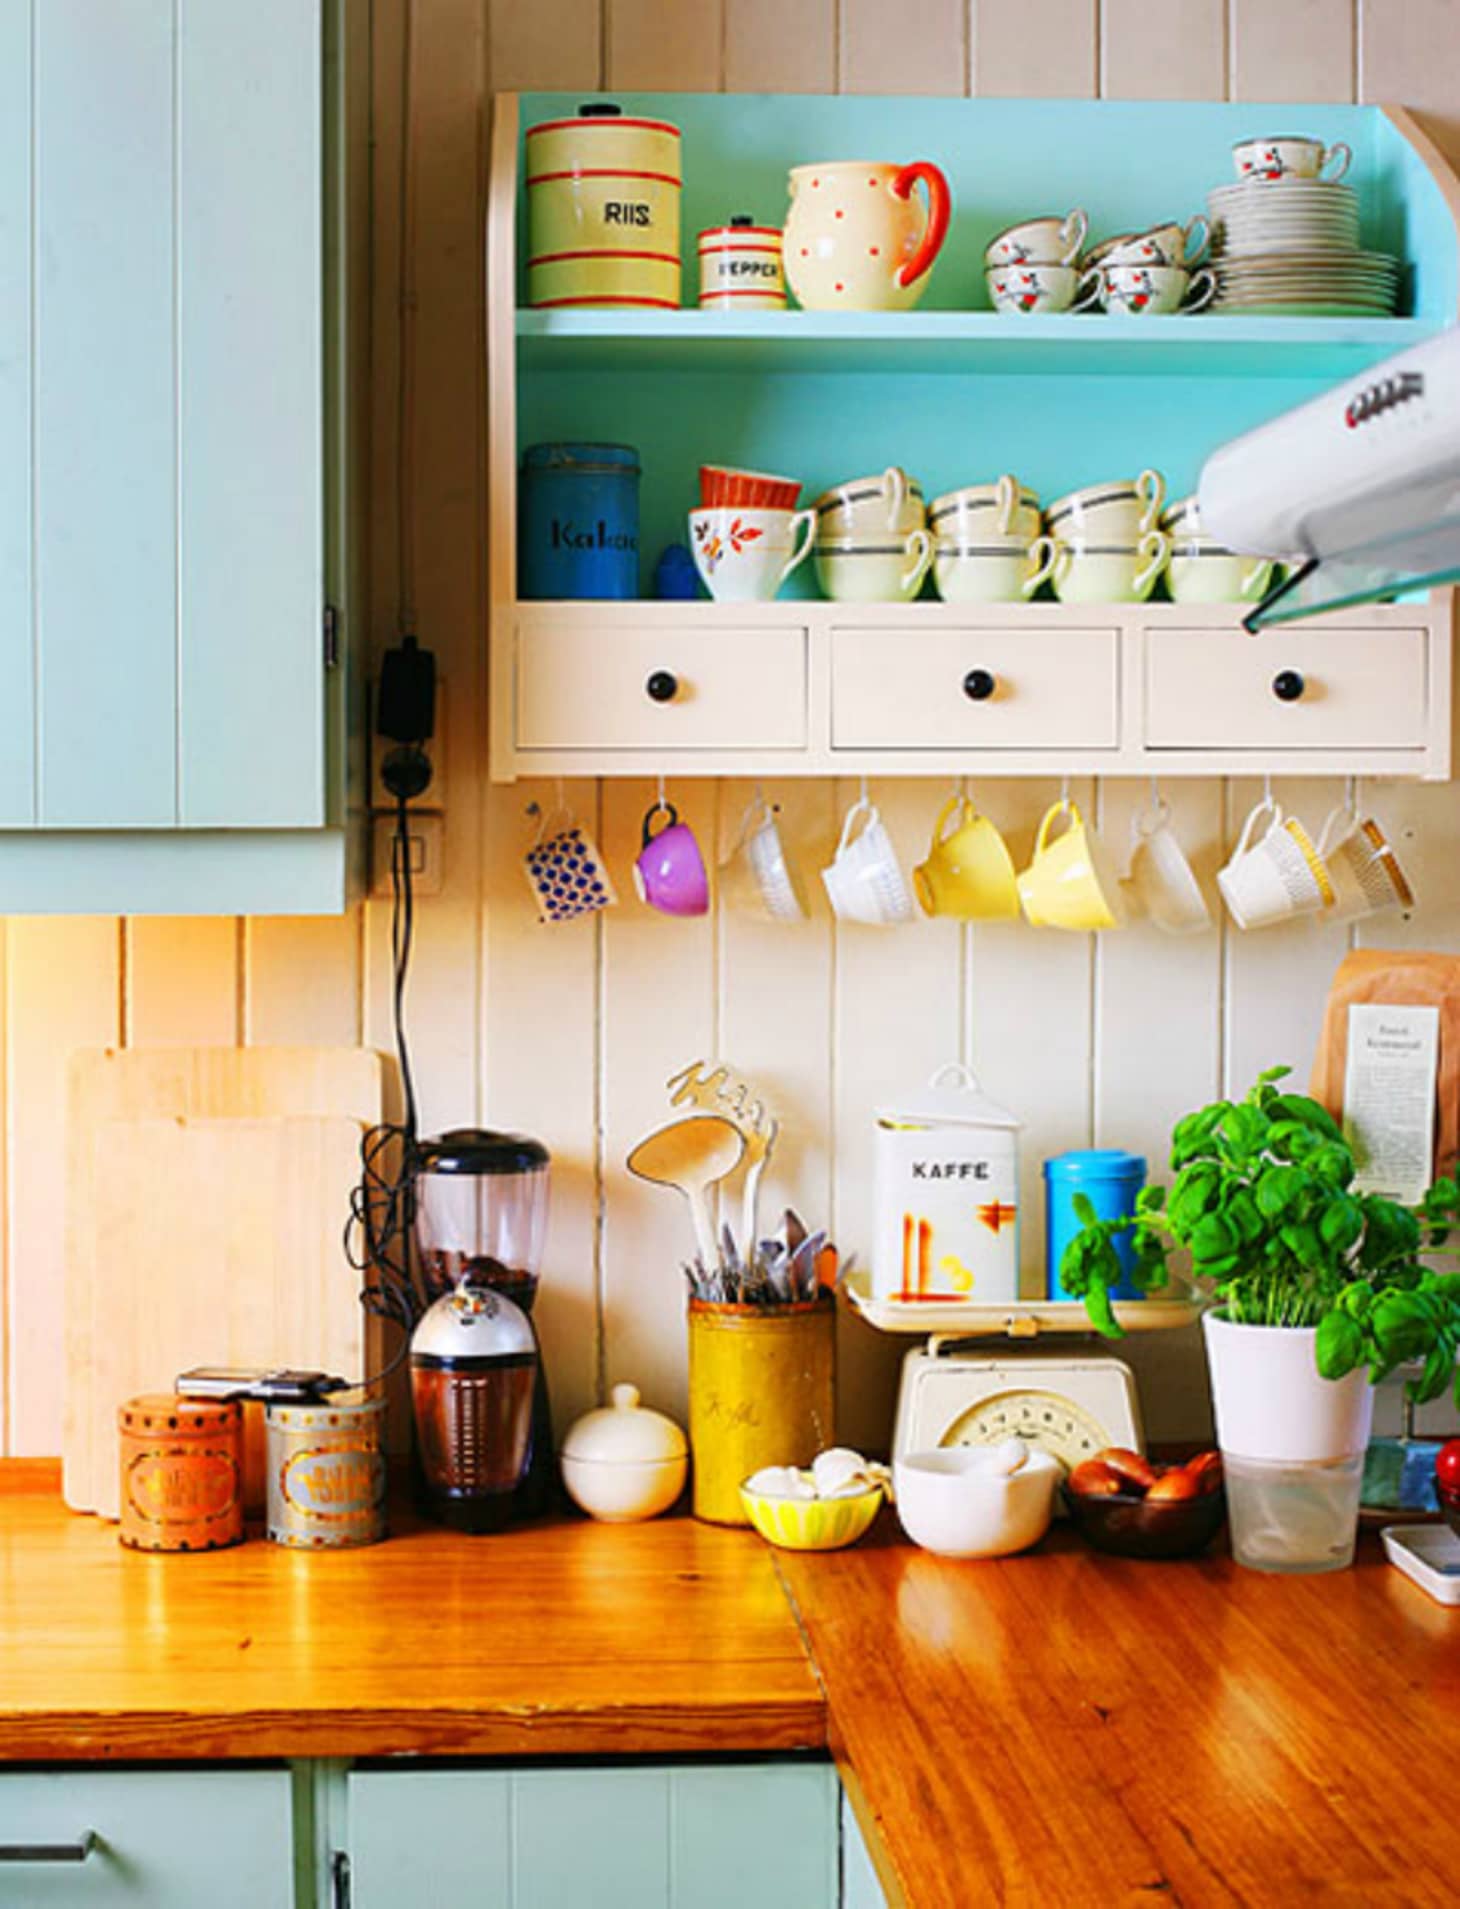 6 Ways To Organize Coffee Mugs And Show Them Off Apartment